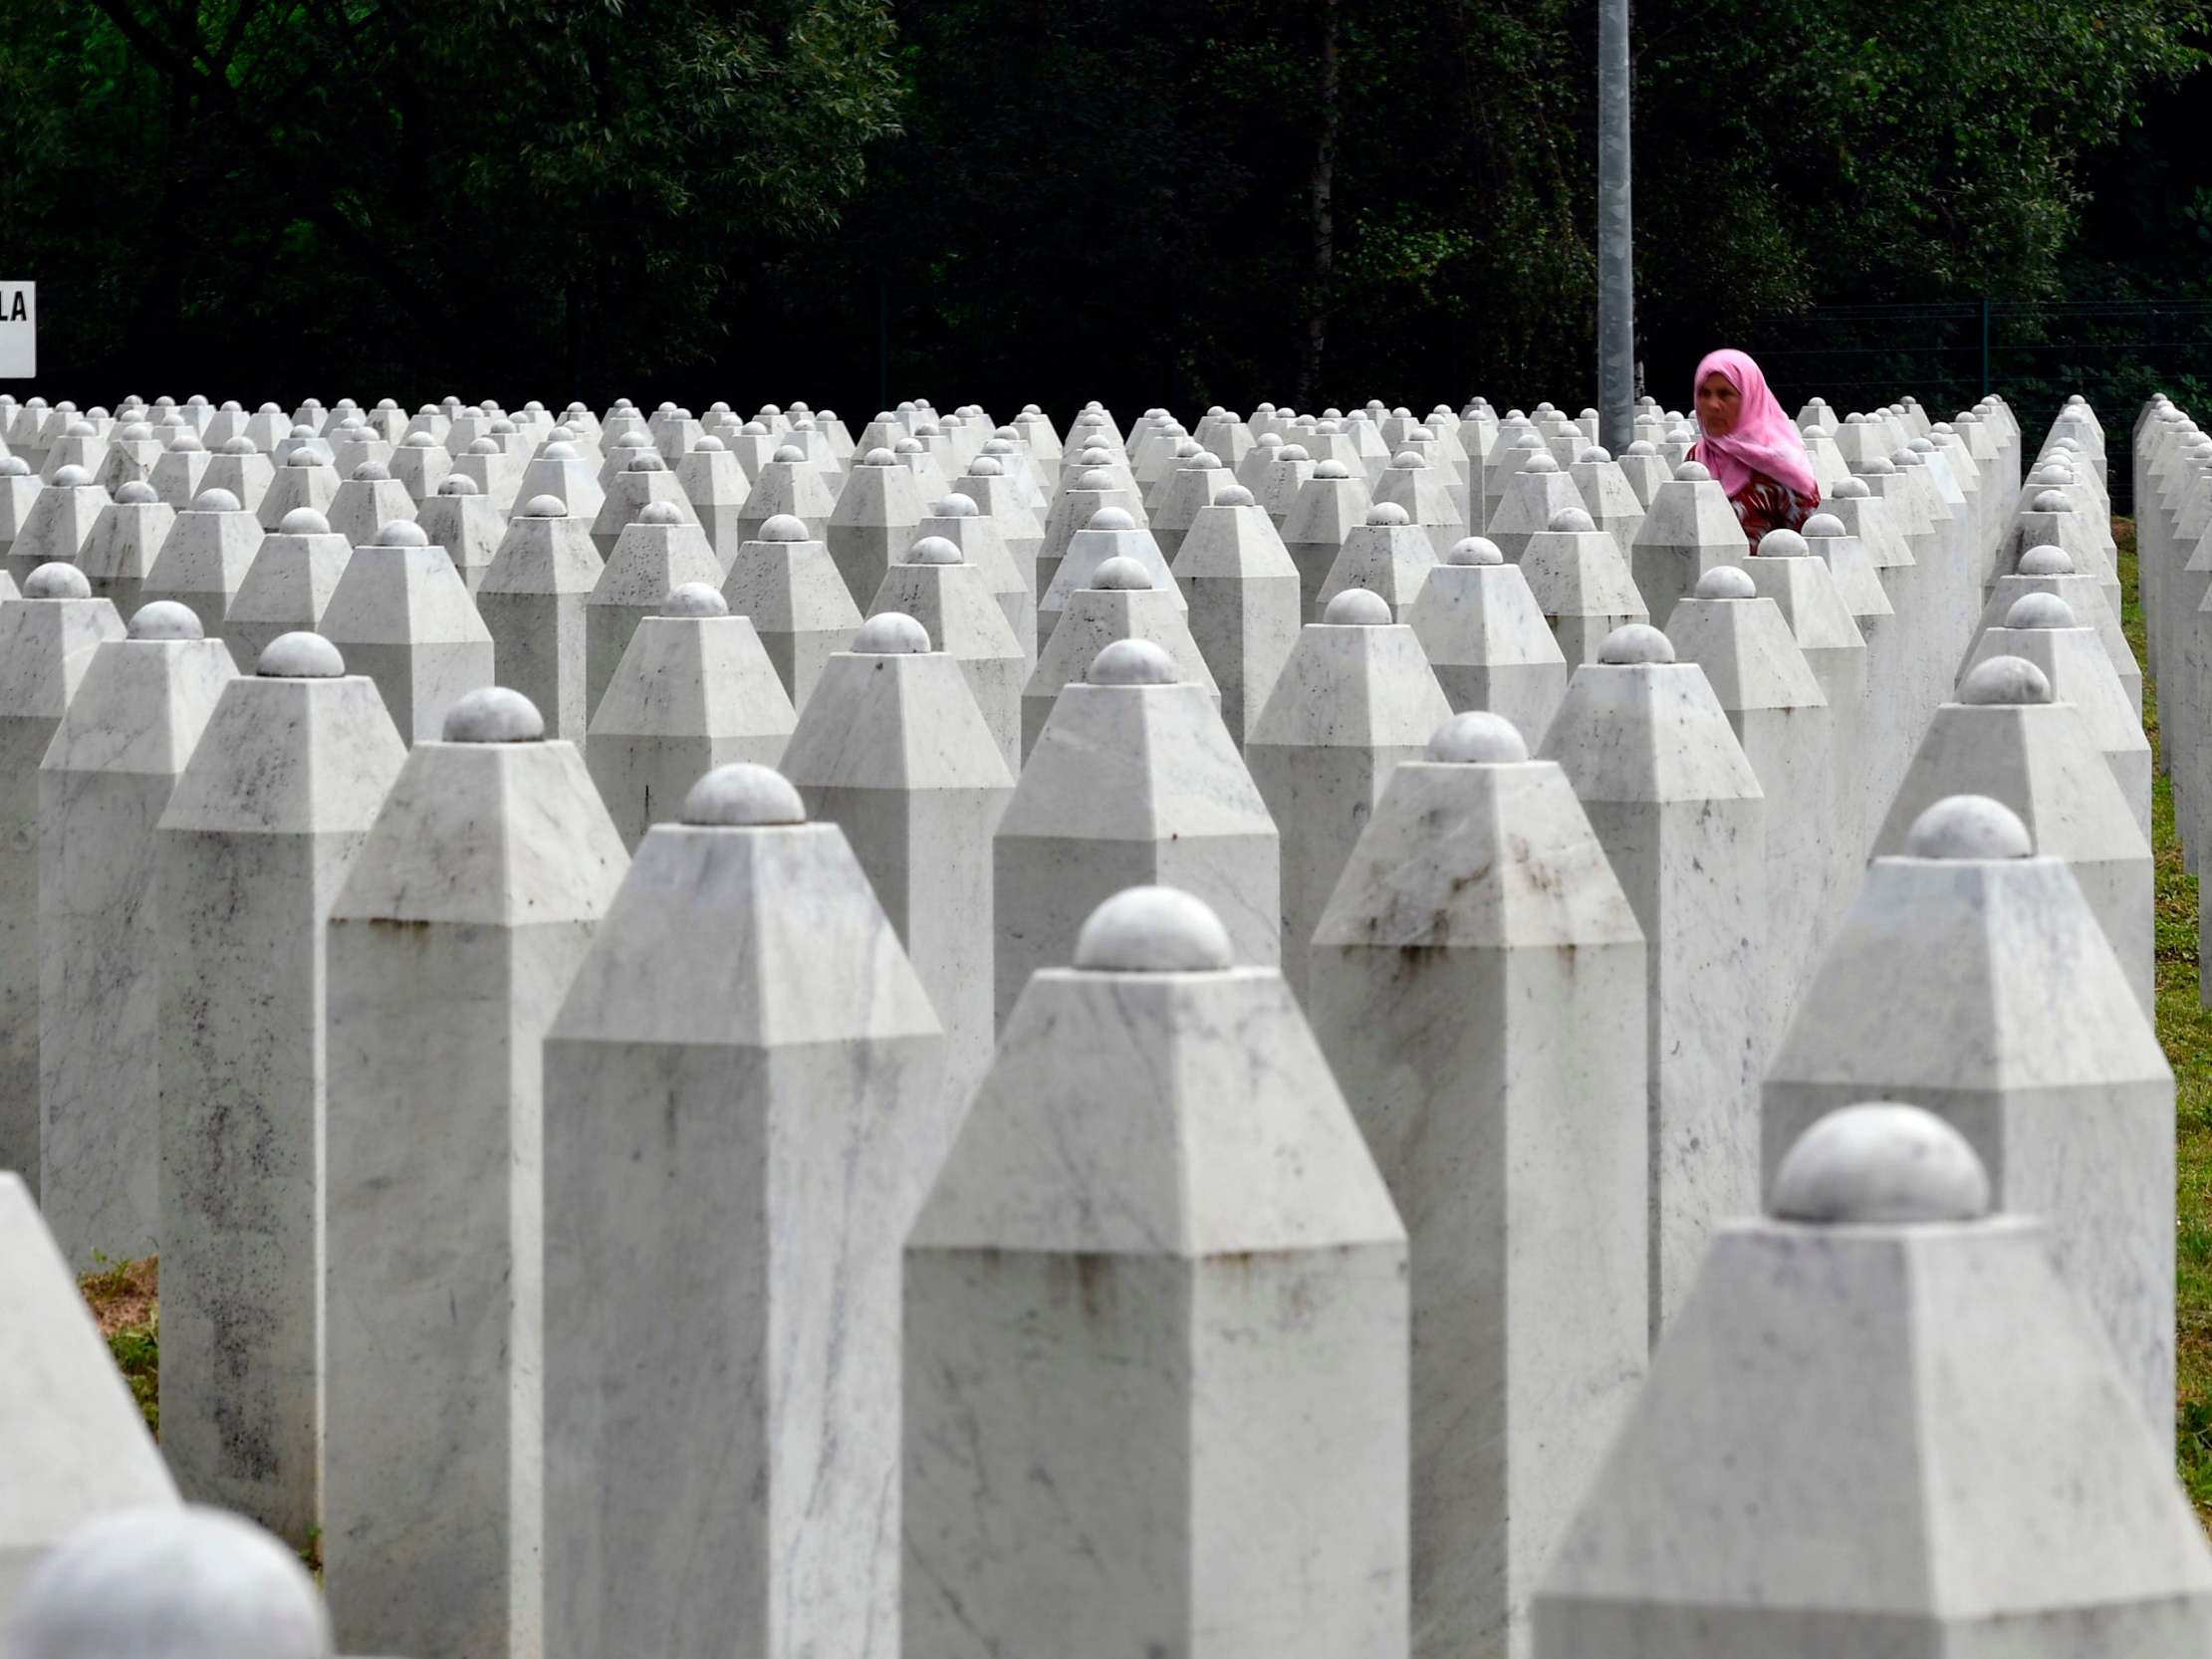 In 2013, Serbia’s president officially apologised for Srebrenica but refused to call it genocide